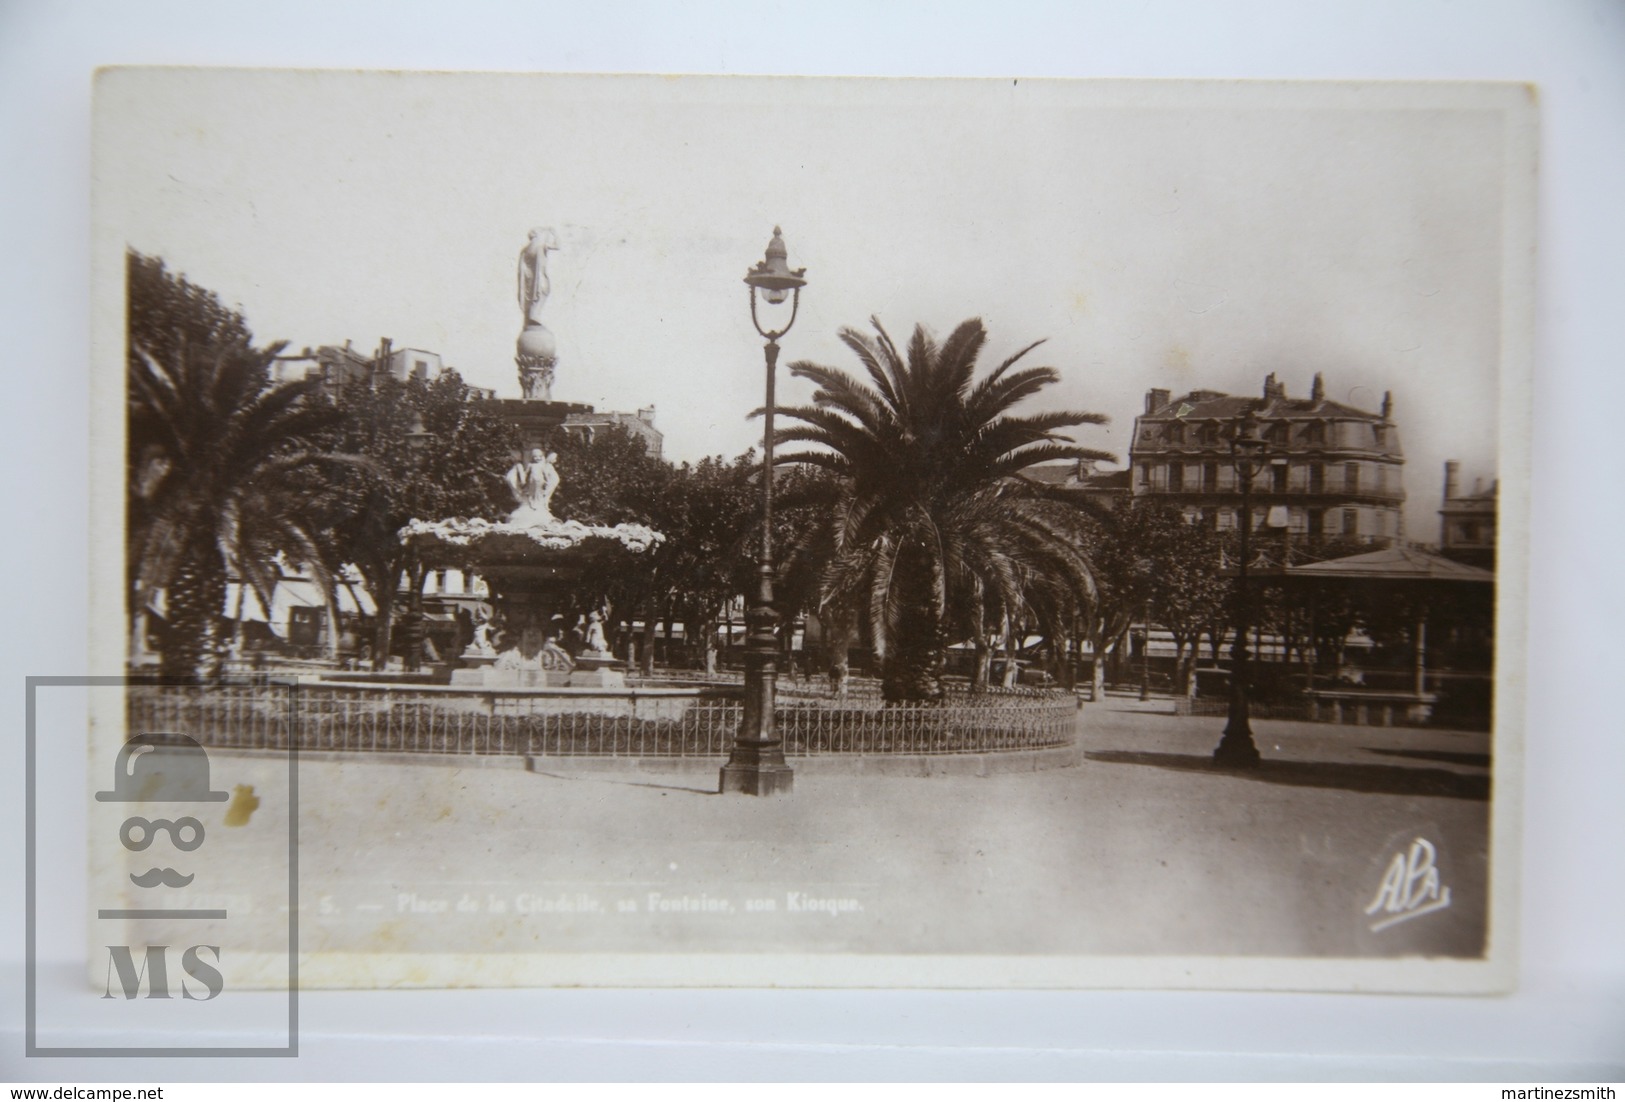 Old Real Photo Postcard France - Beziers - Place De La Citadelle, Sa Fontaine - Posted 1936 - Beziers